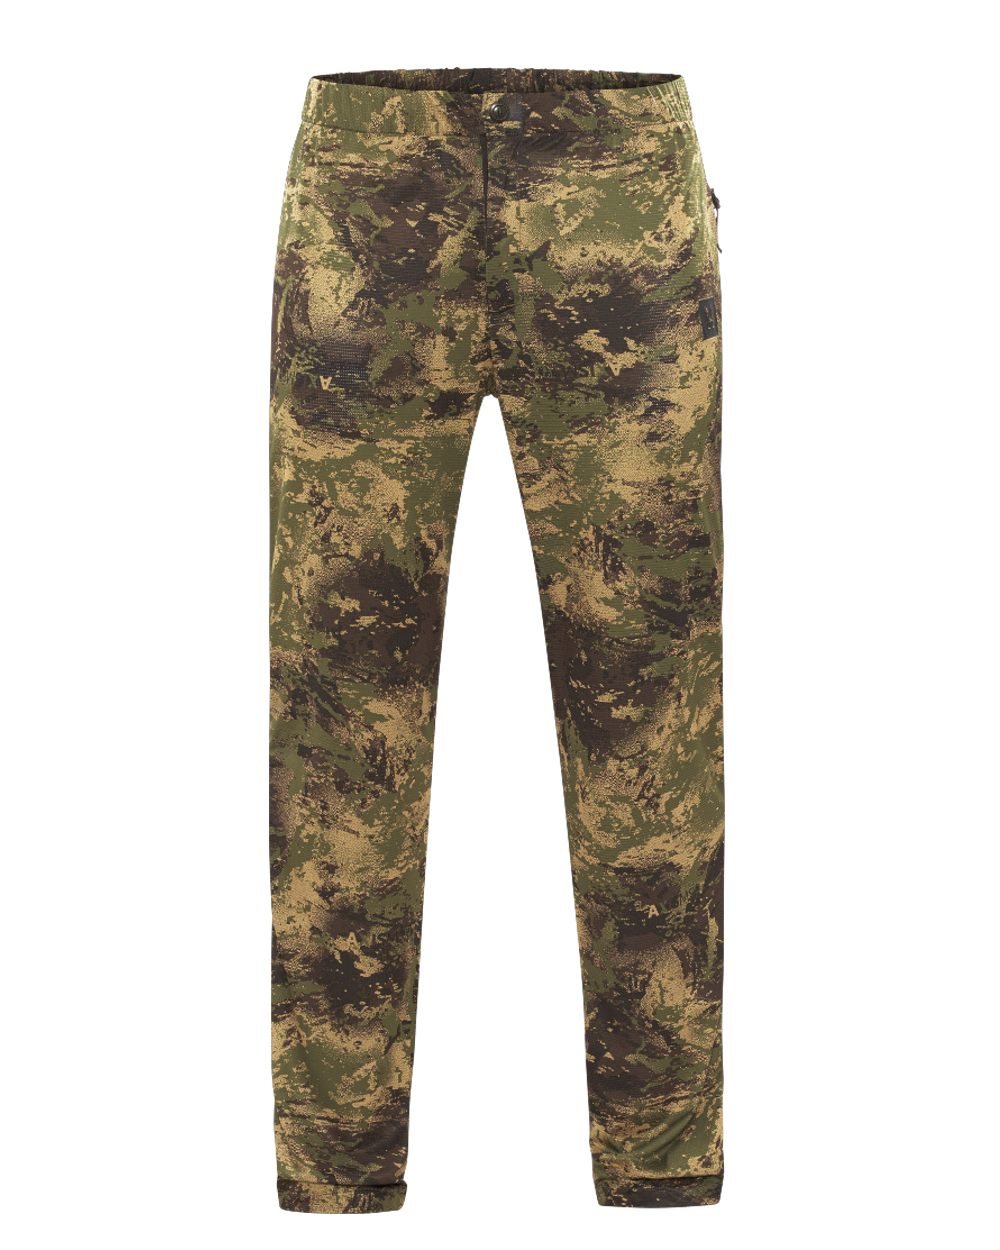 Axis Forest colour Harkila Deer Stalker Camo Cover Trousers on white background 